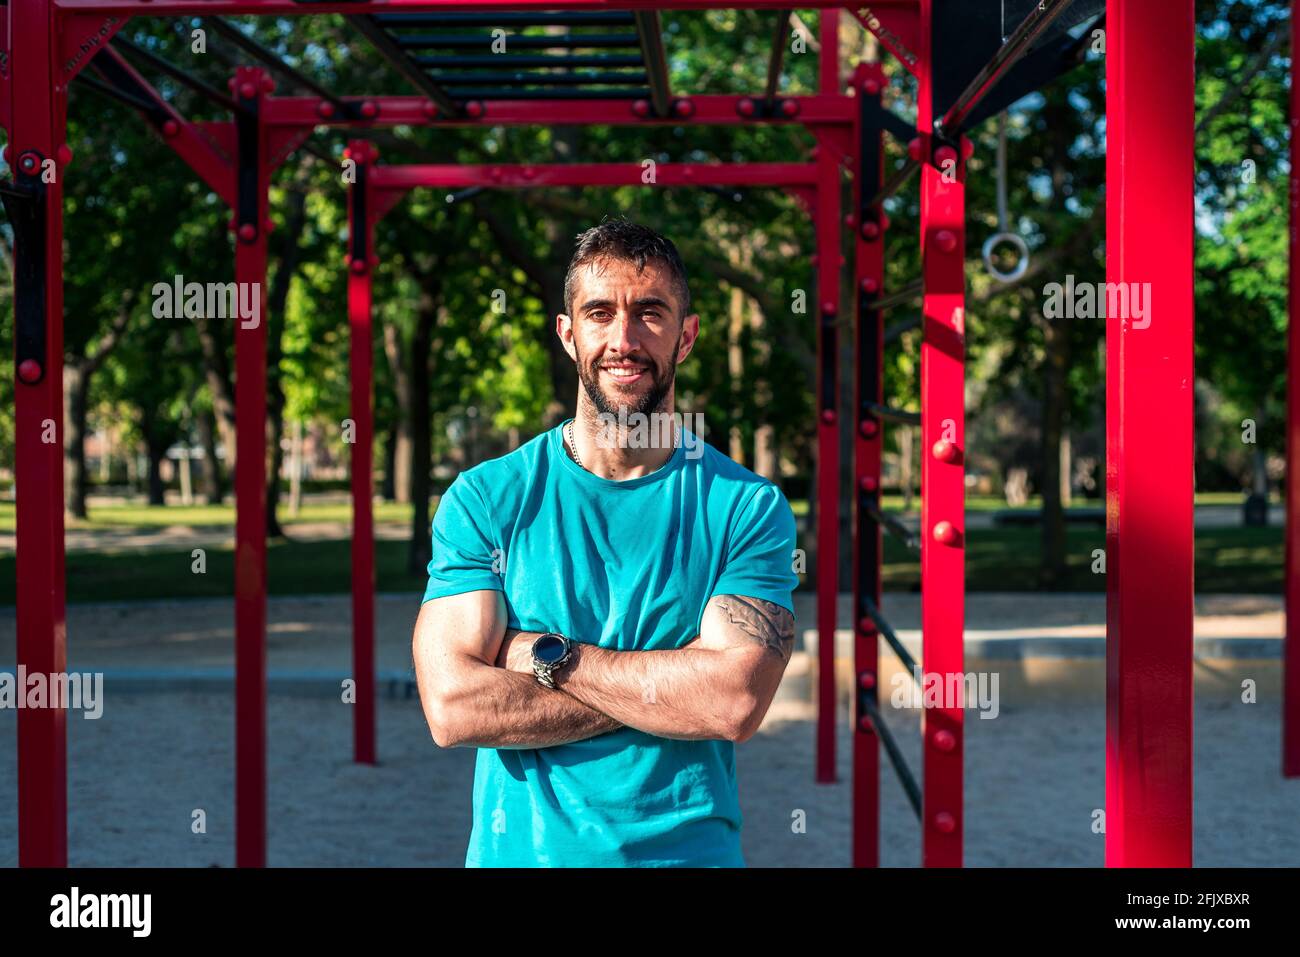 Portrait of a brunette bearded athlete with crossed arms. Red calisthenics bars in the background . Outdoor fitness concept. Stock Photo